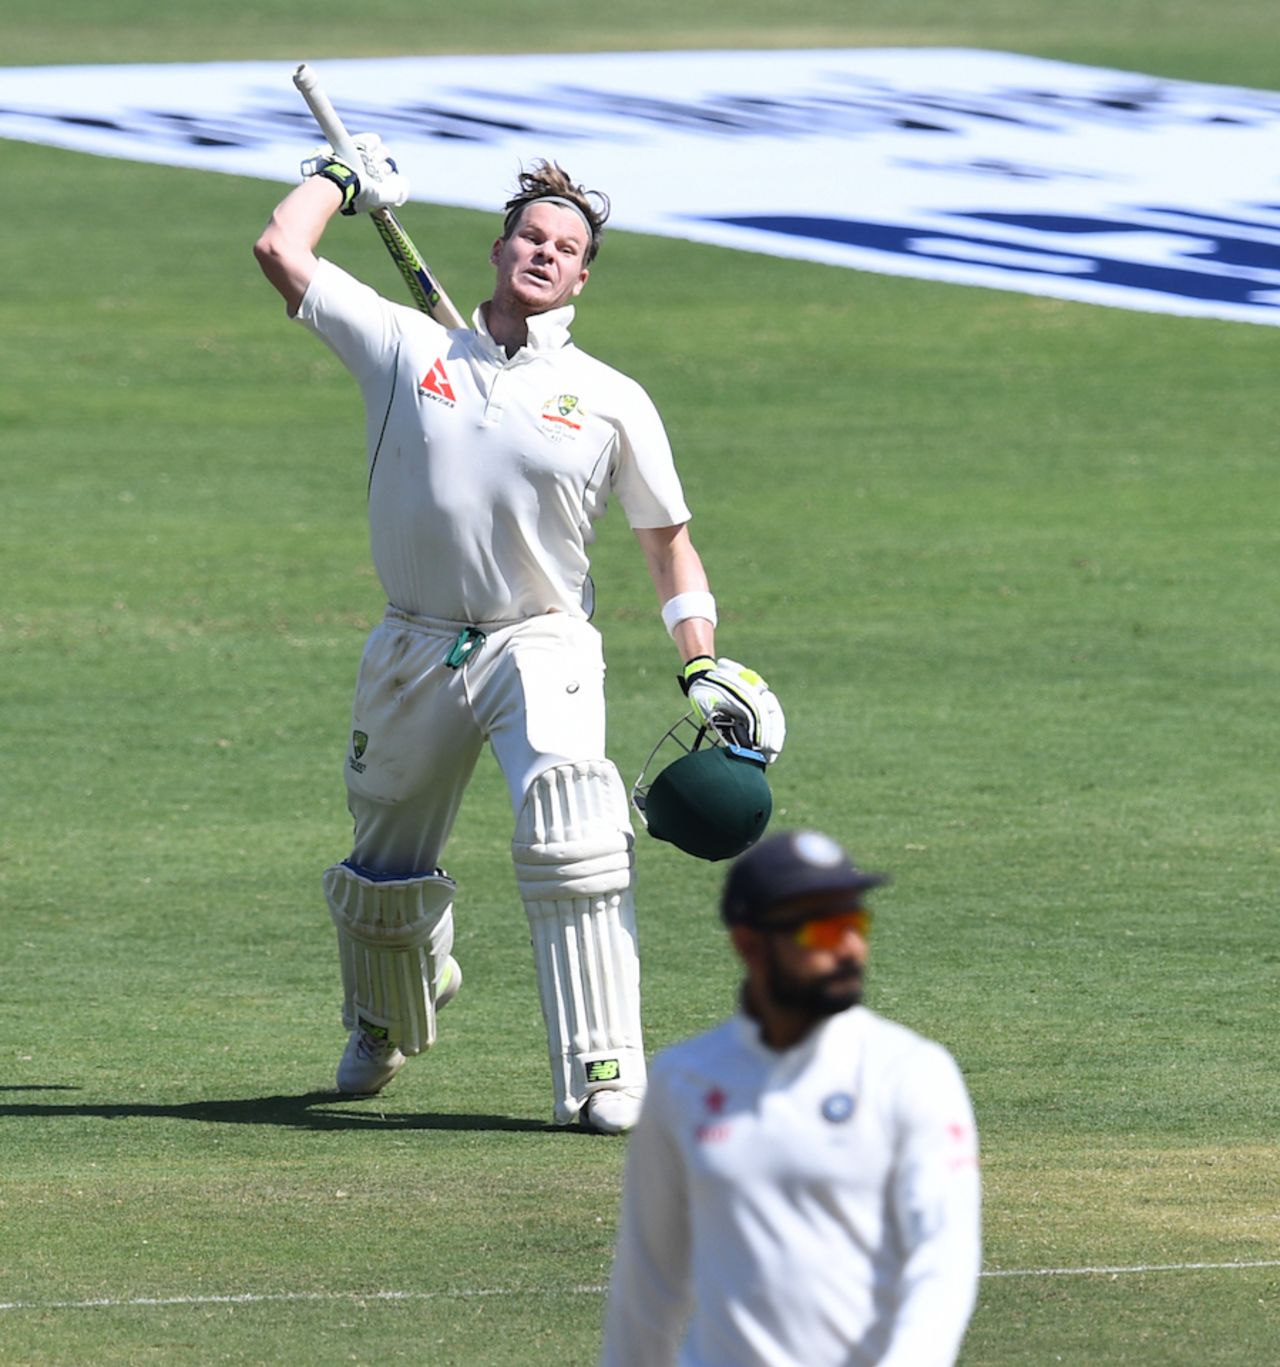 Steven Smith is thrilled to reach his century, India v Australia, 1st Test, Pune, 3rd day, February 25, 2017